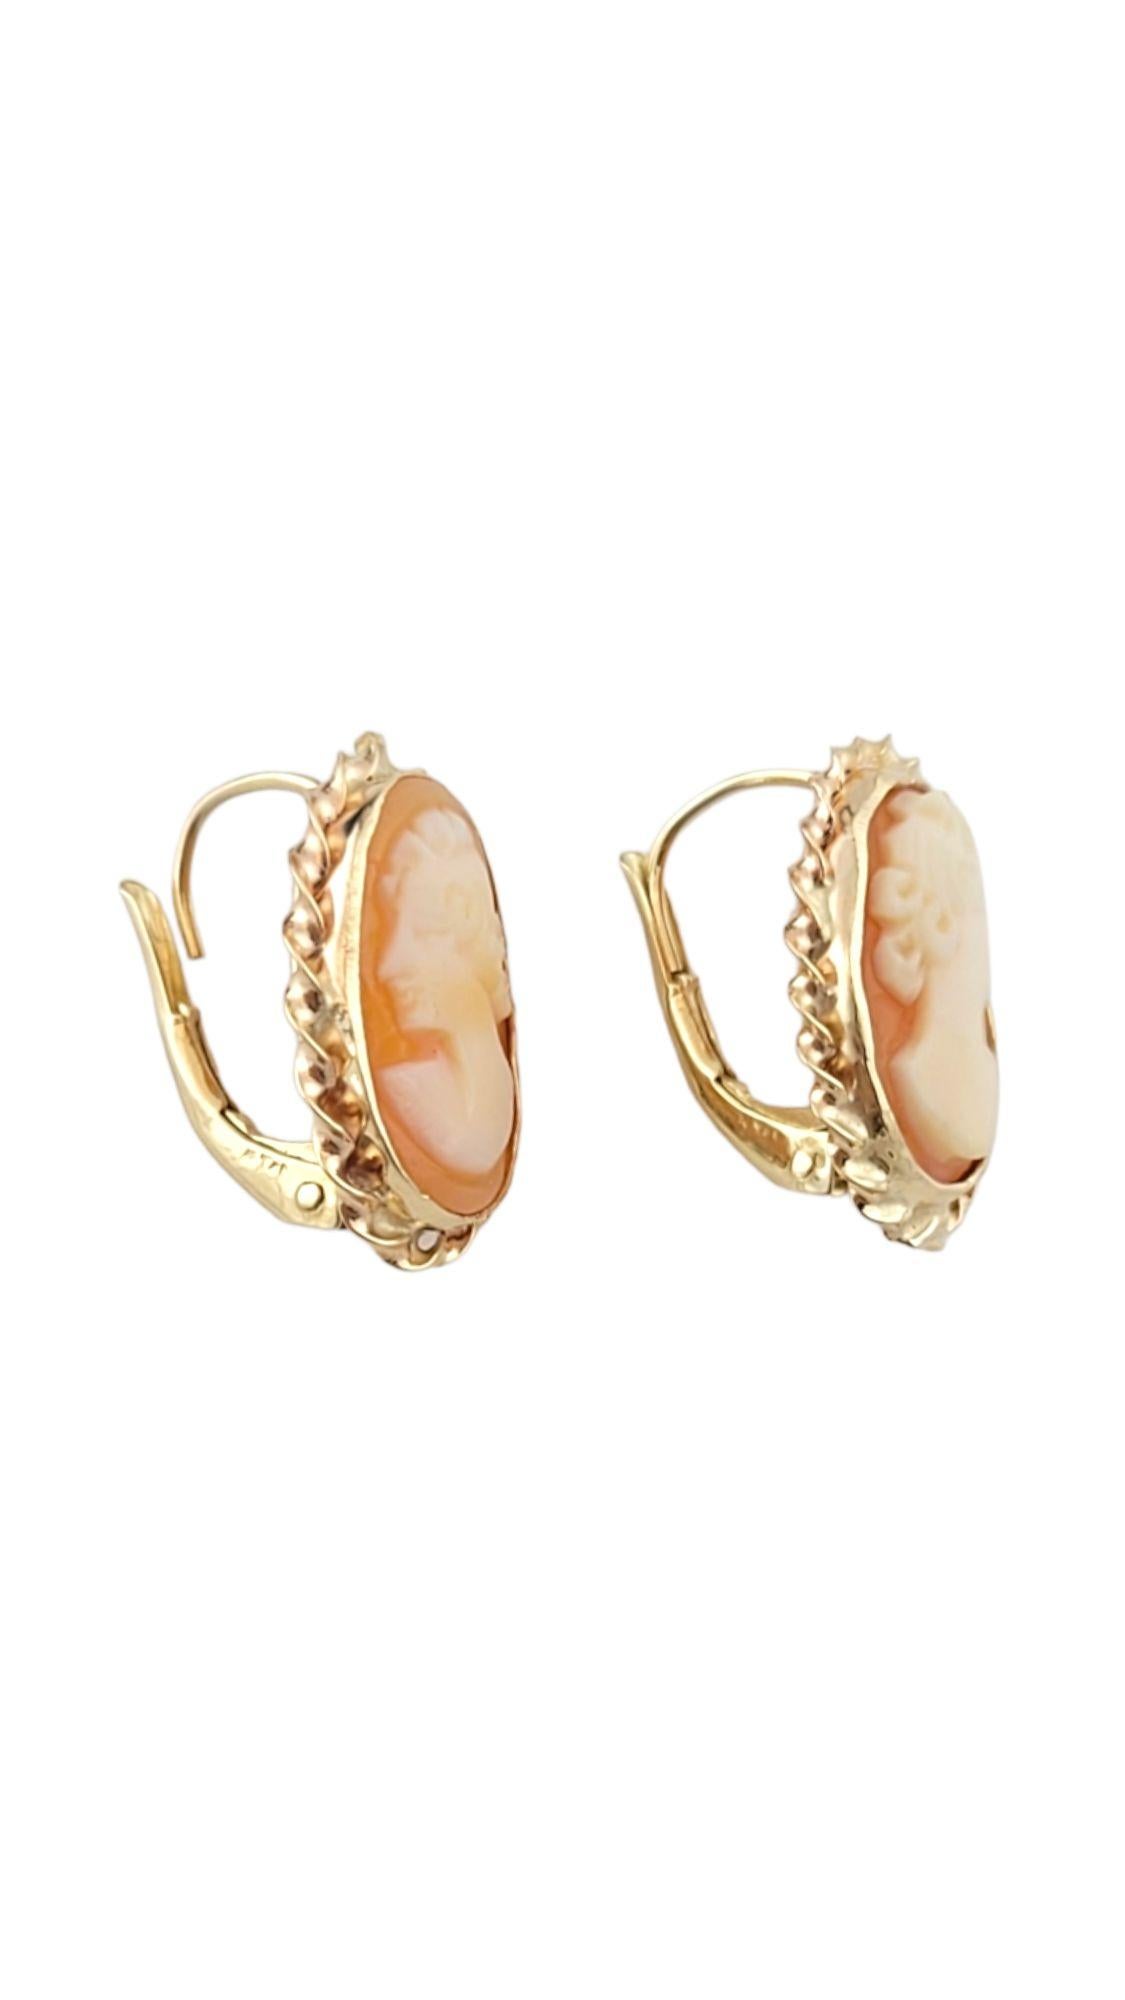 14K Yellow Gold Cameo Earrings #14559 In Good Condition For Sale In Washington Depot, CT